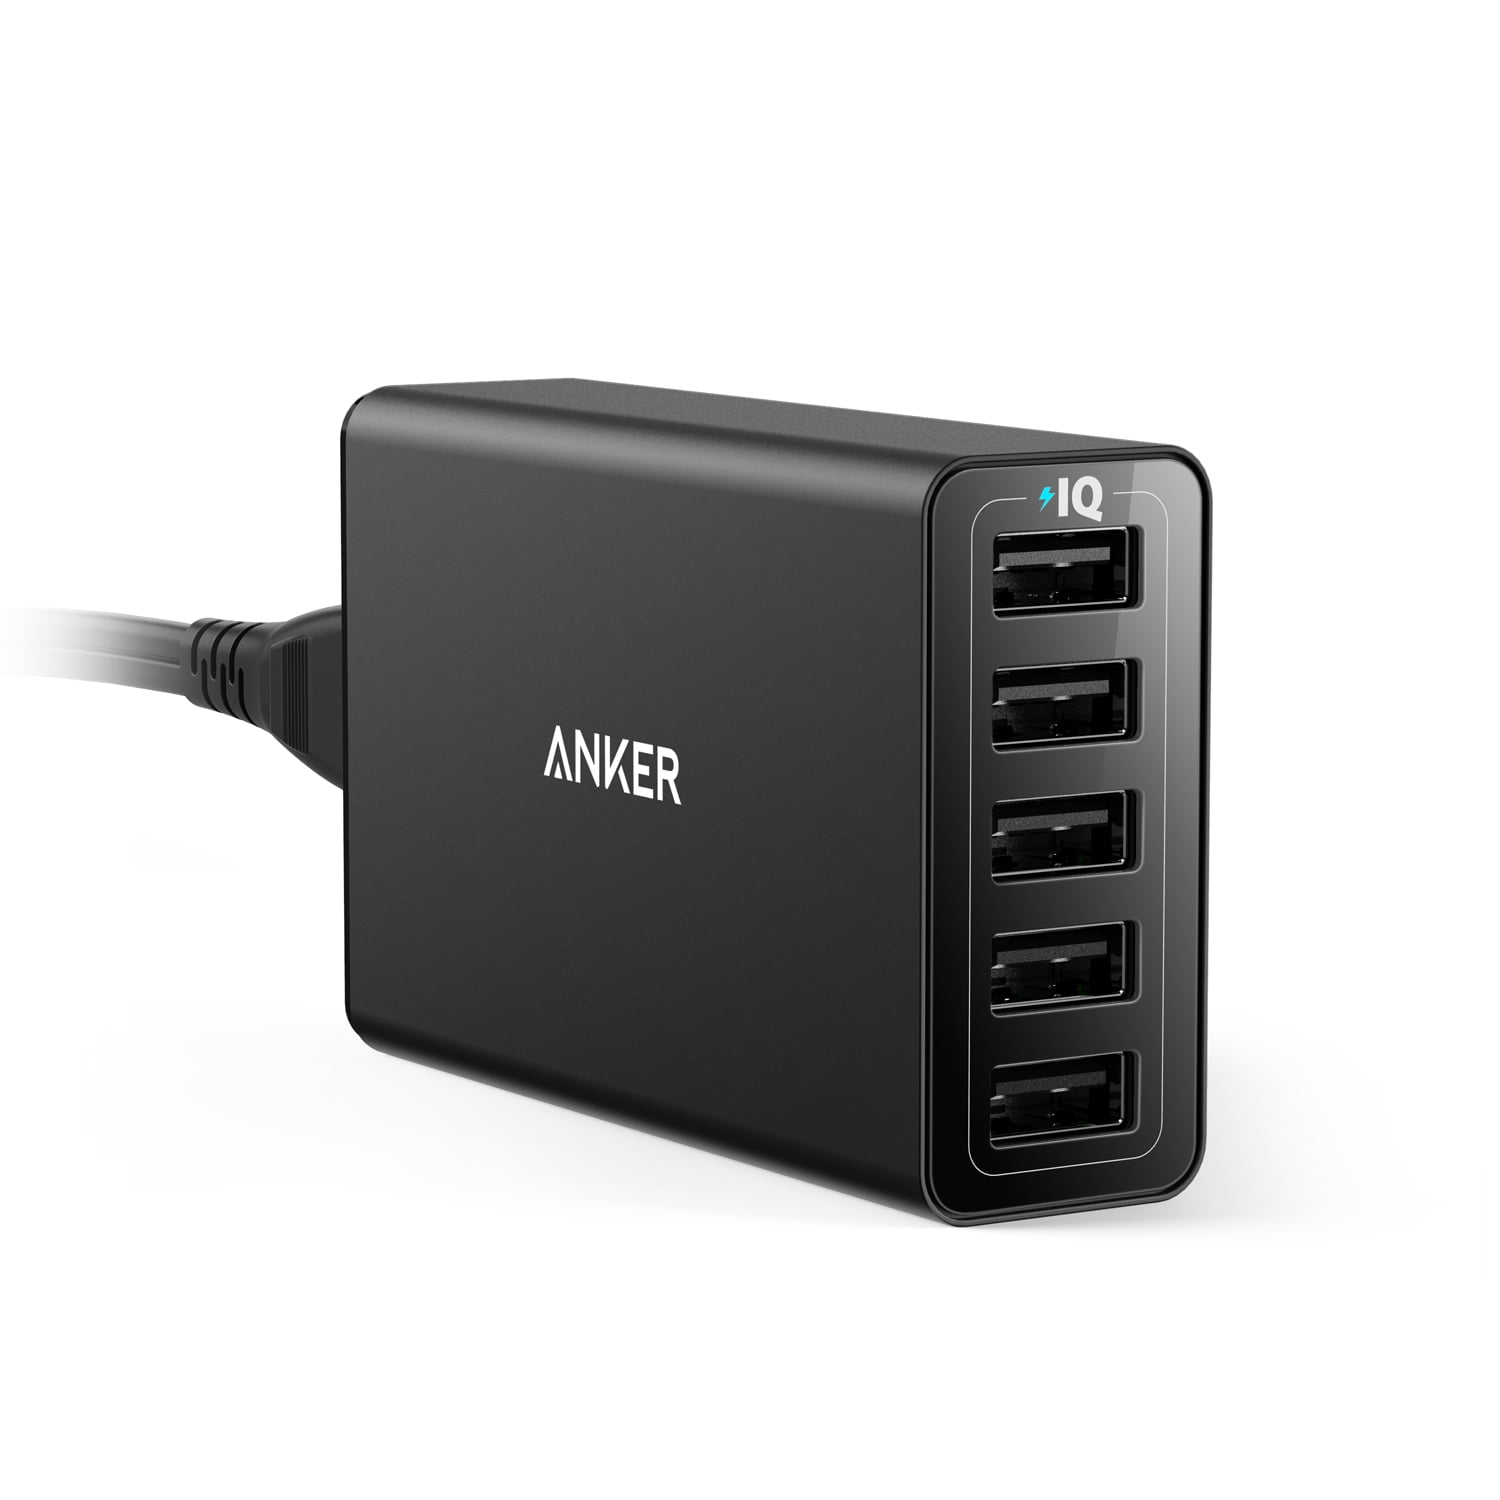 5-Port USB Wall Charger - AC to USB Adapter, 5V 8A Output, USB Chargers  and Power Adapters, USB Cables, Adapters, and Hubs